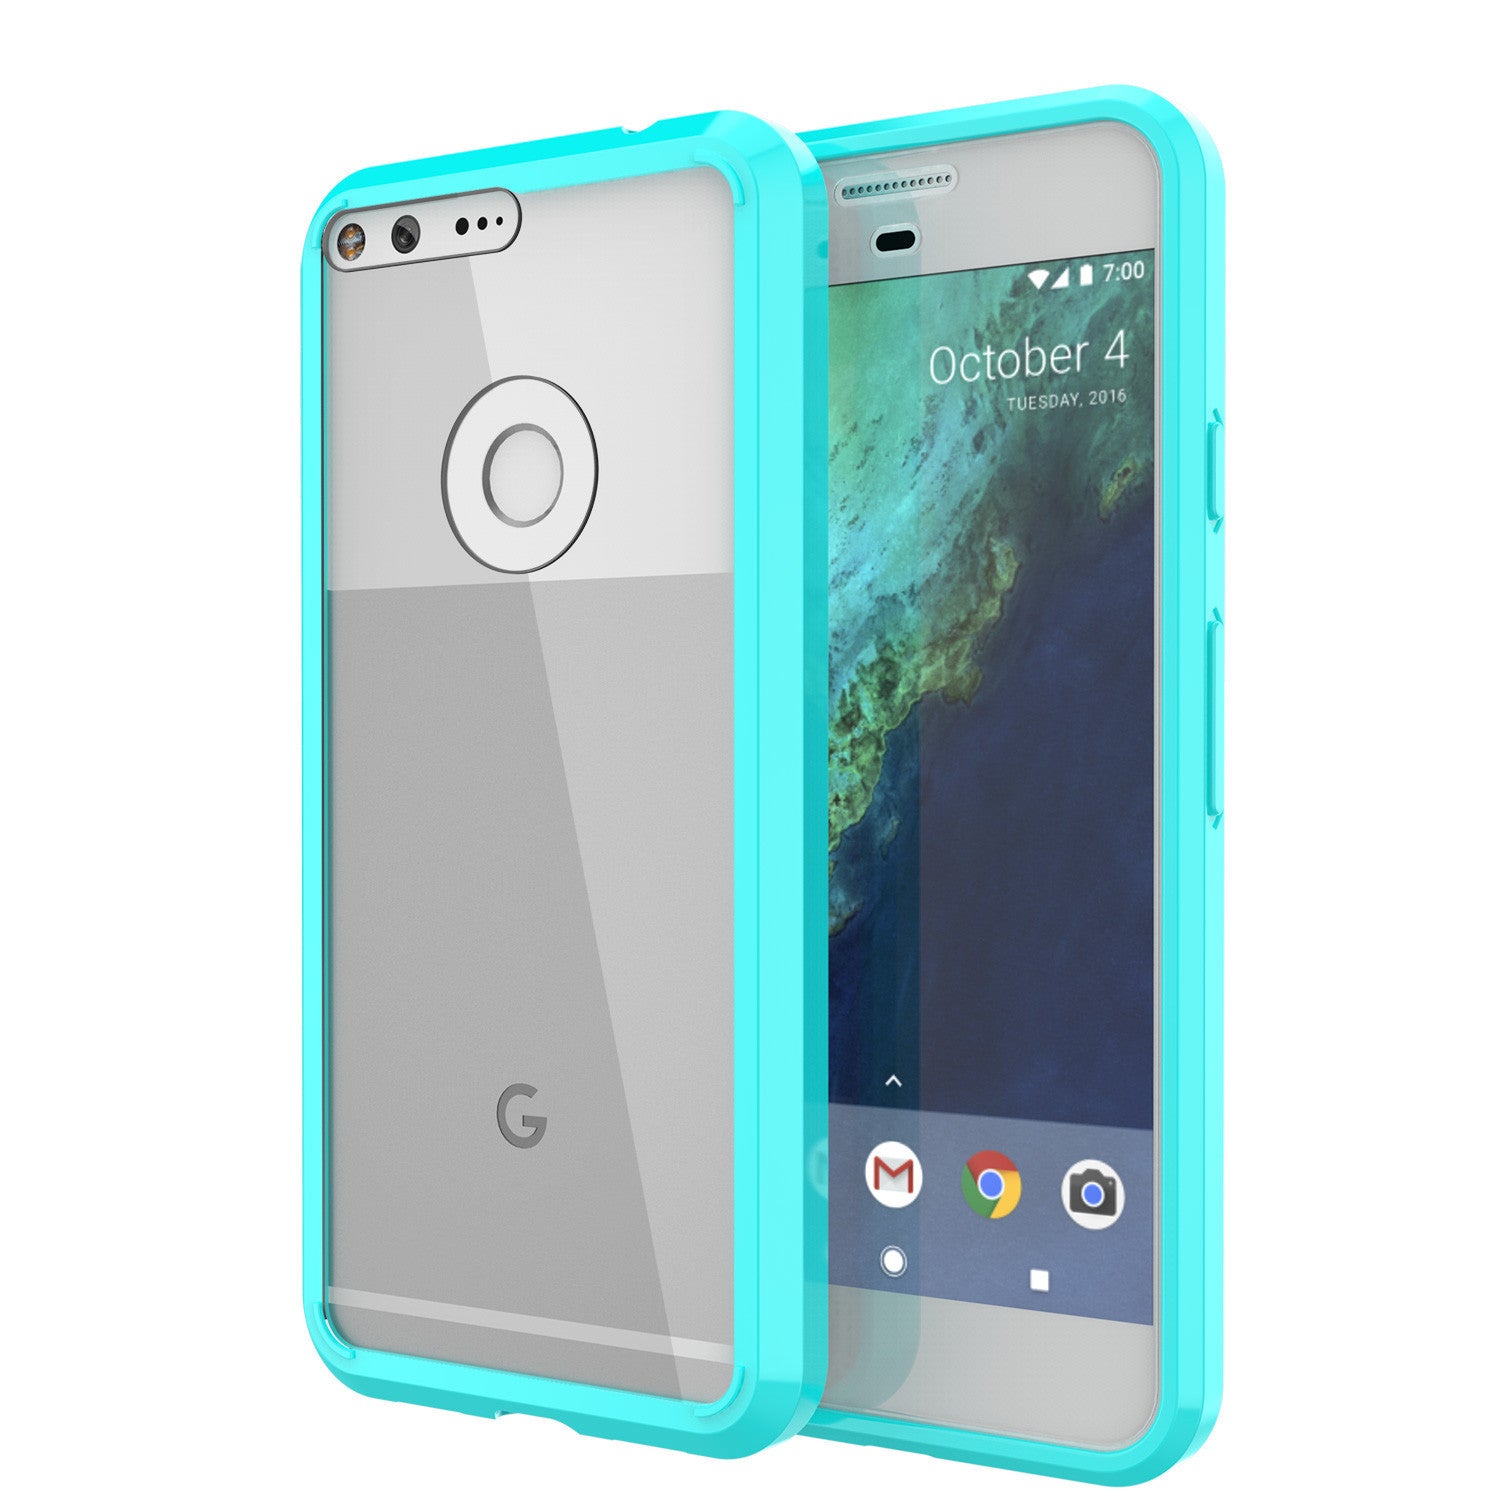 Google Pixel Case Punkcase® LUCID 2.0 Teal Series w/ PUNK SHIELD Glass Screen Protector | Ultra Fit (Color in image: teal)